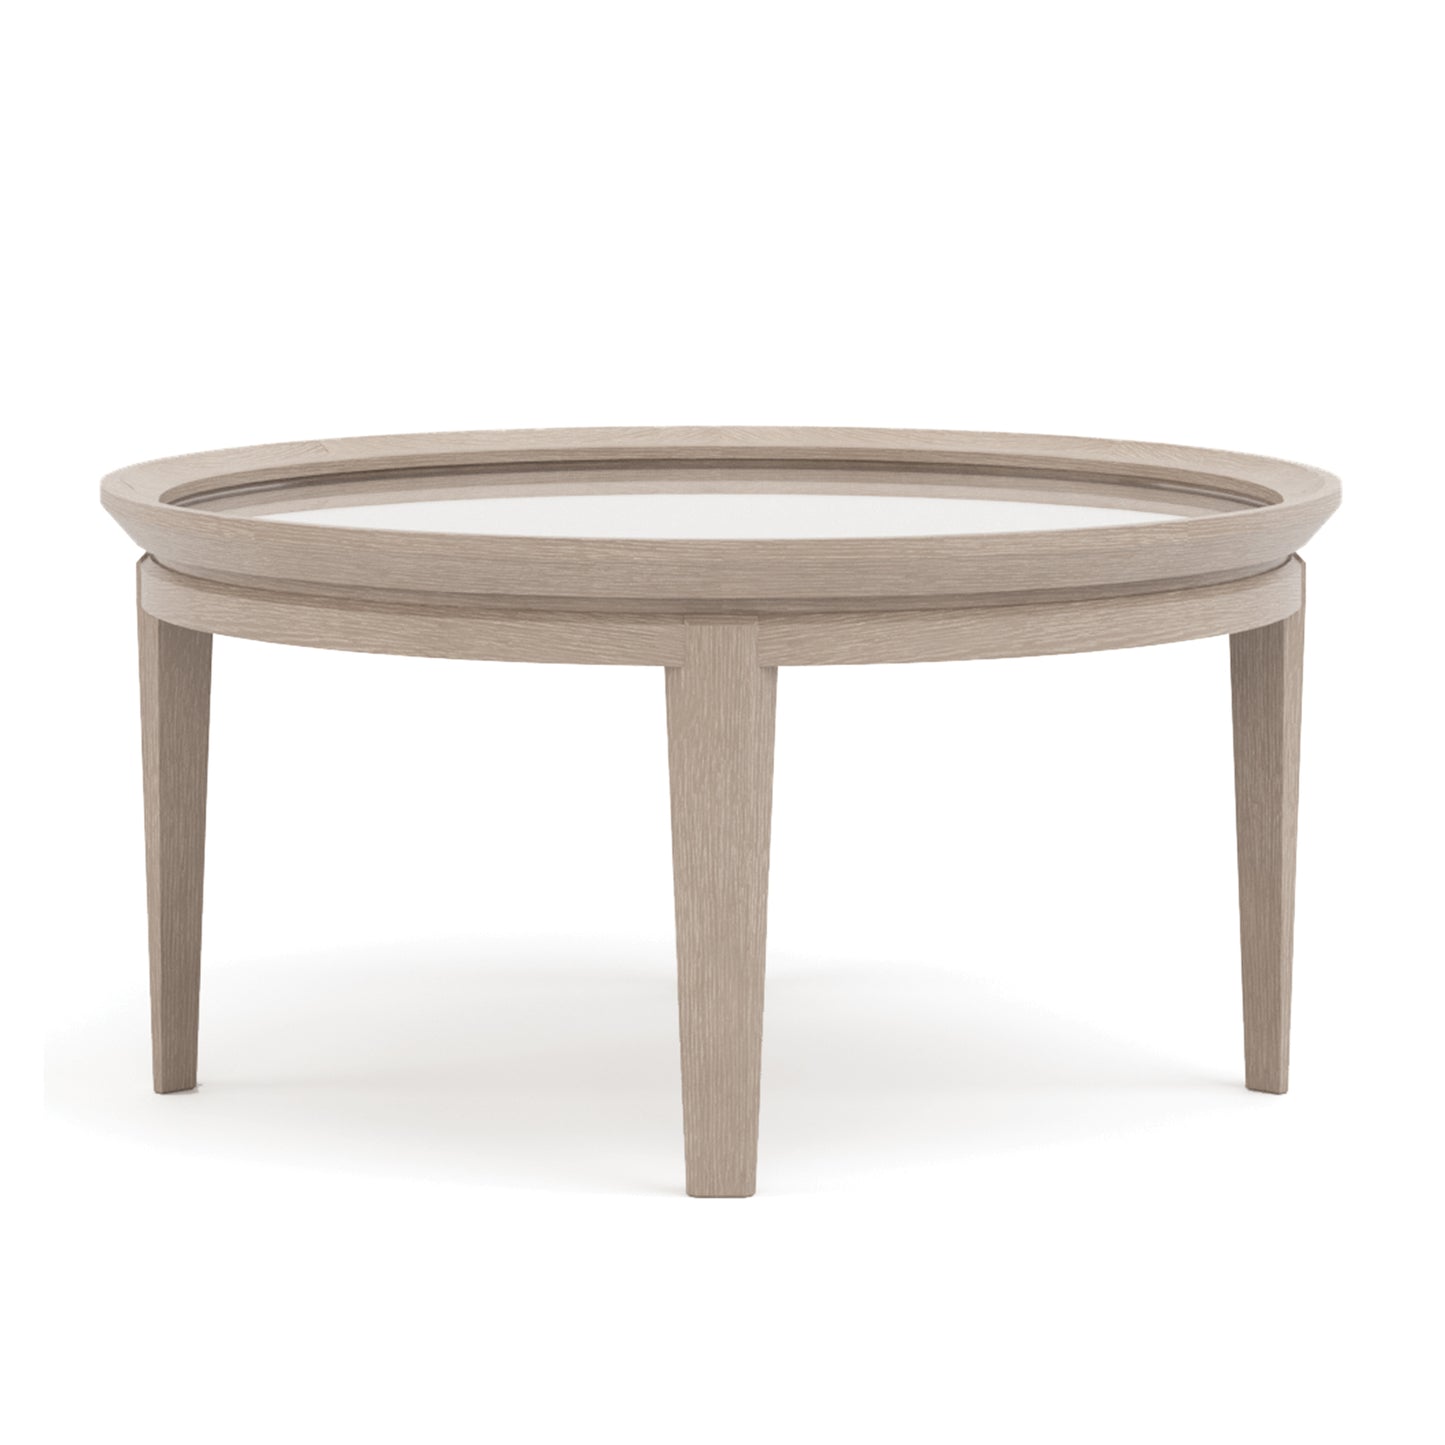 Maidstone 36-inch Round Cocktail Table, Woven Jute